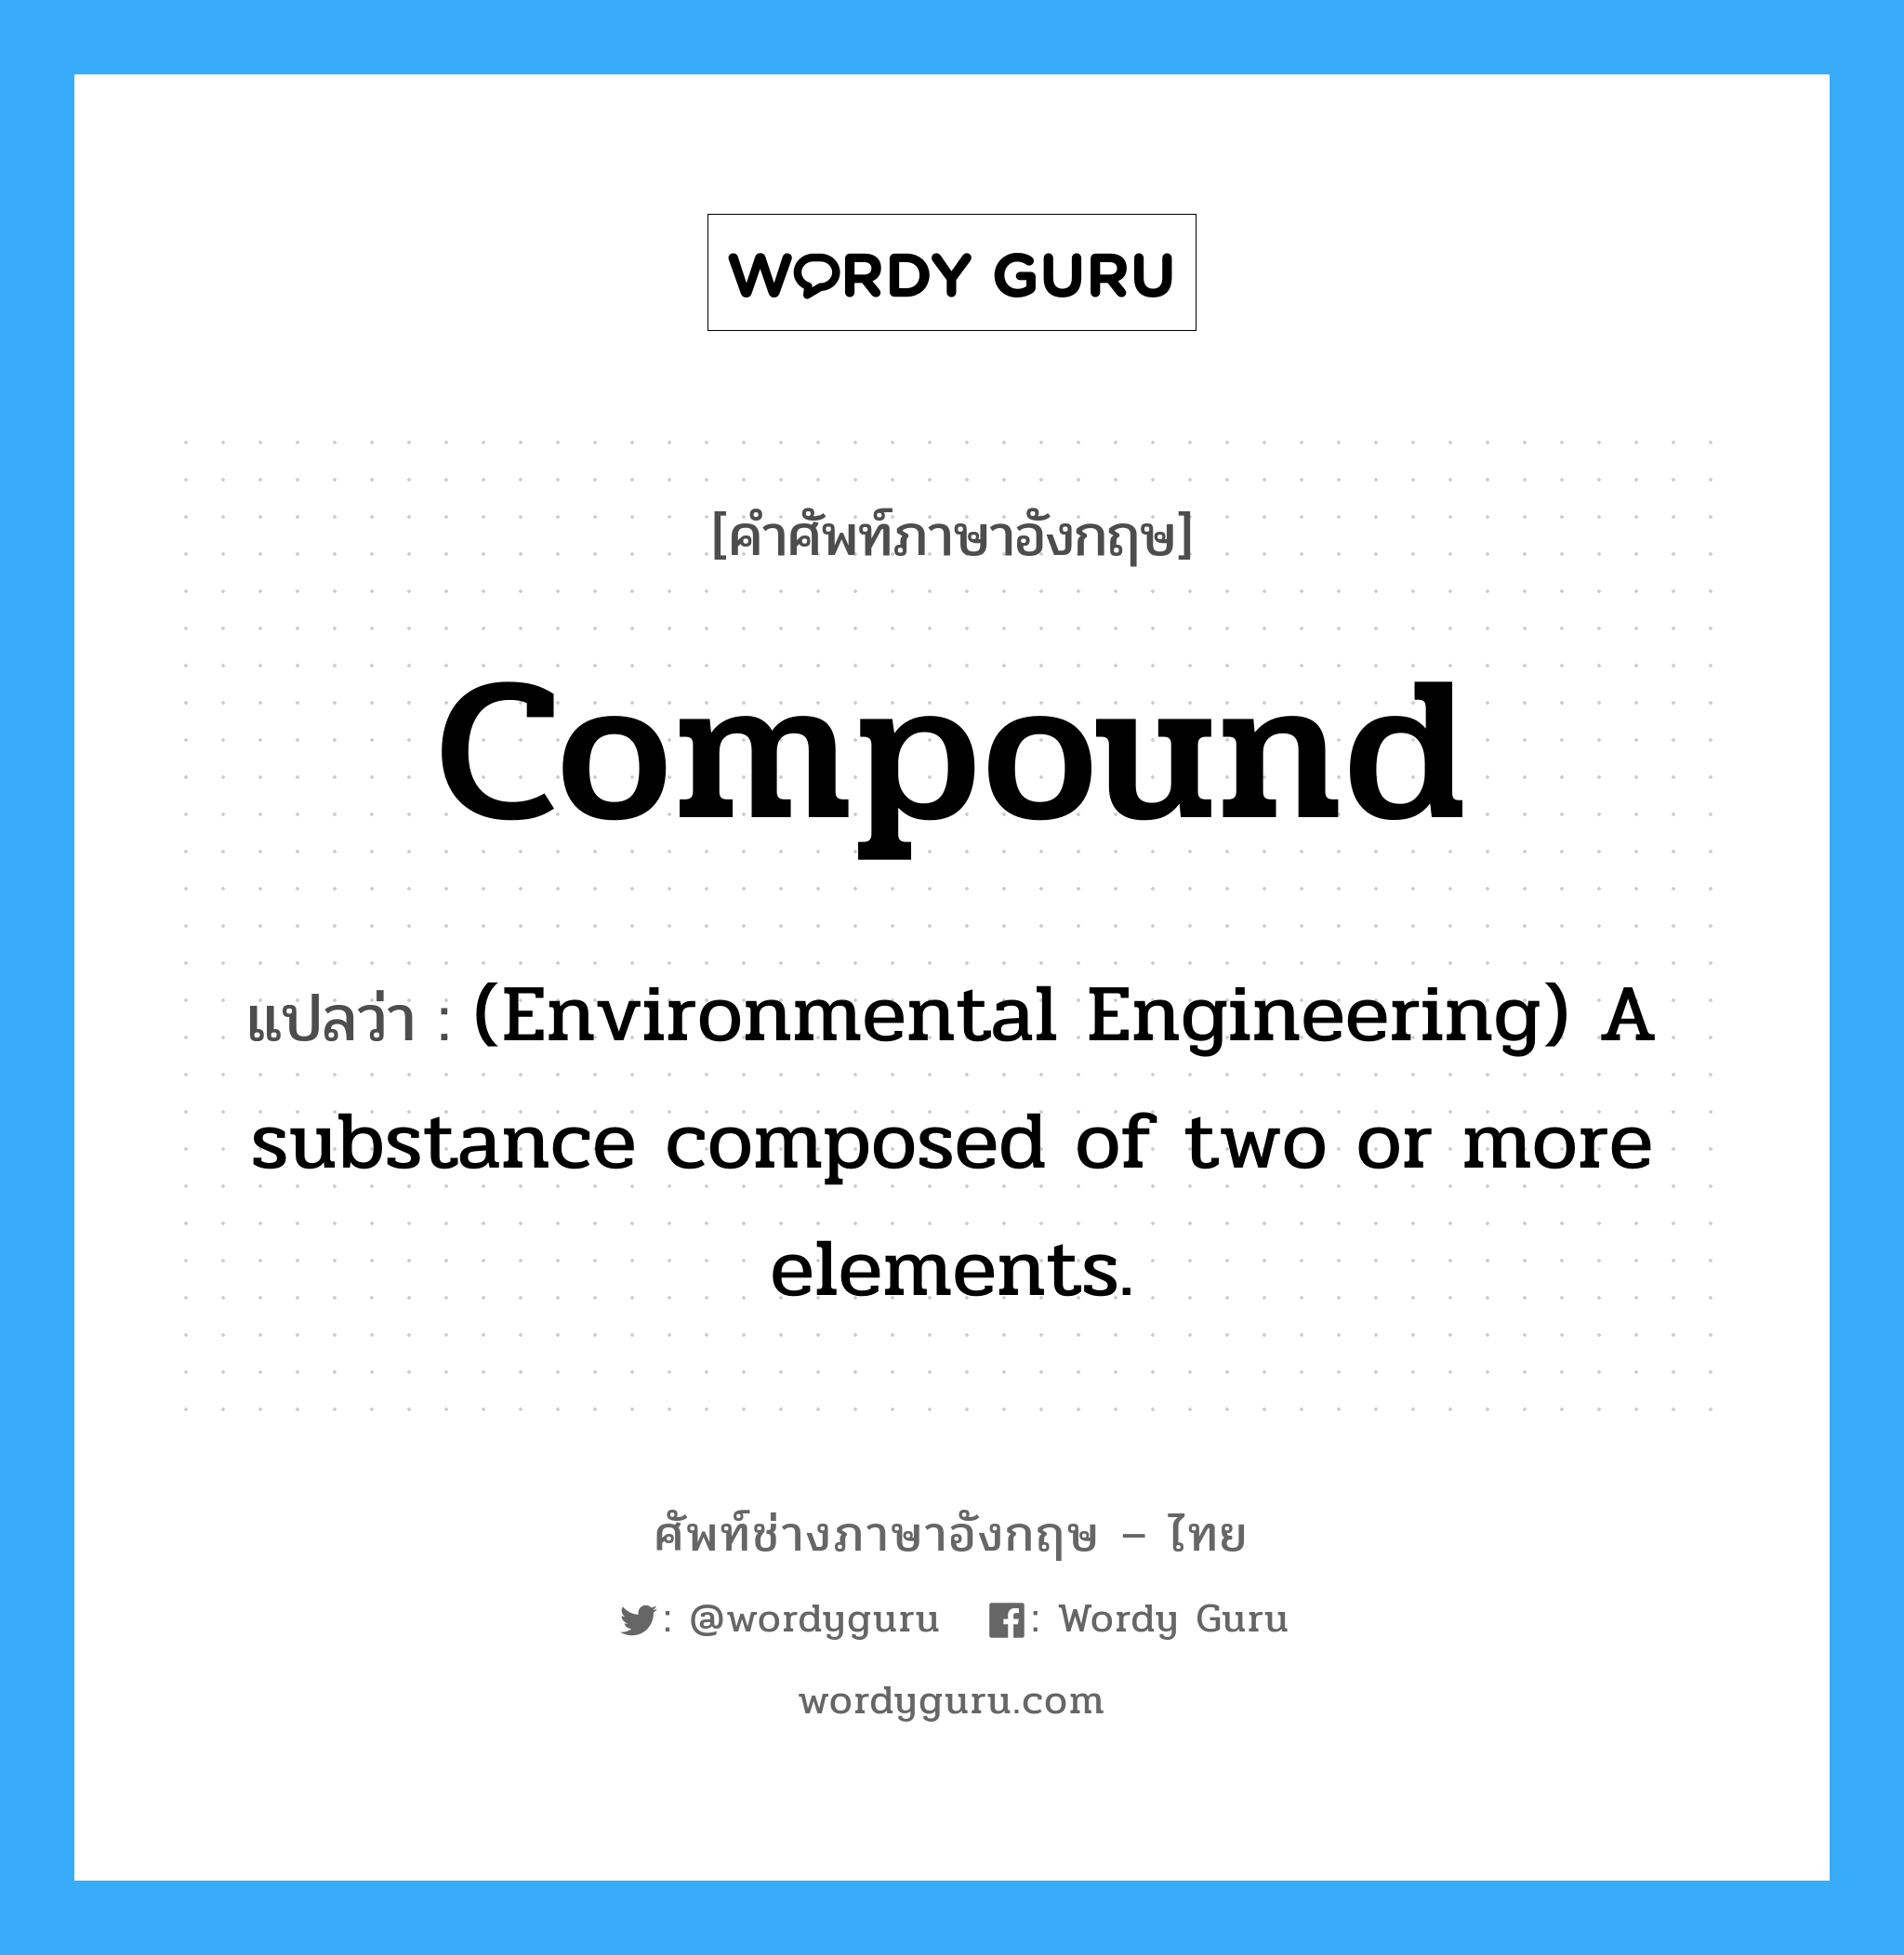 (Environmental Engineering) A substance composed of two or more elements. ภาษาอังกฤษ?, คำศัพท์ช่างภาษาอังกฤษ - ไทย (Environmental Engineering) A substance composed of two or more elements. คำศัพท์ภาษาอังกฤษ (Environmental Engineering) A substance composed of two or more elements. แปลว่า Compound